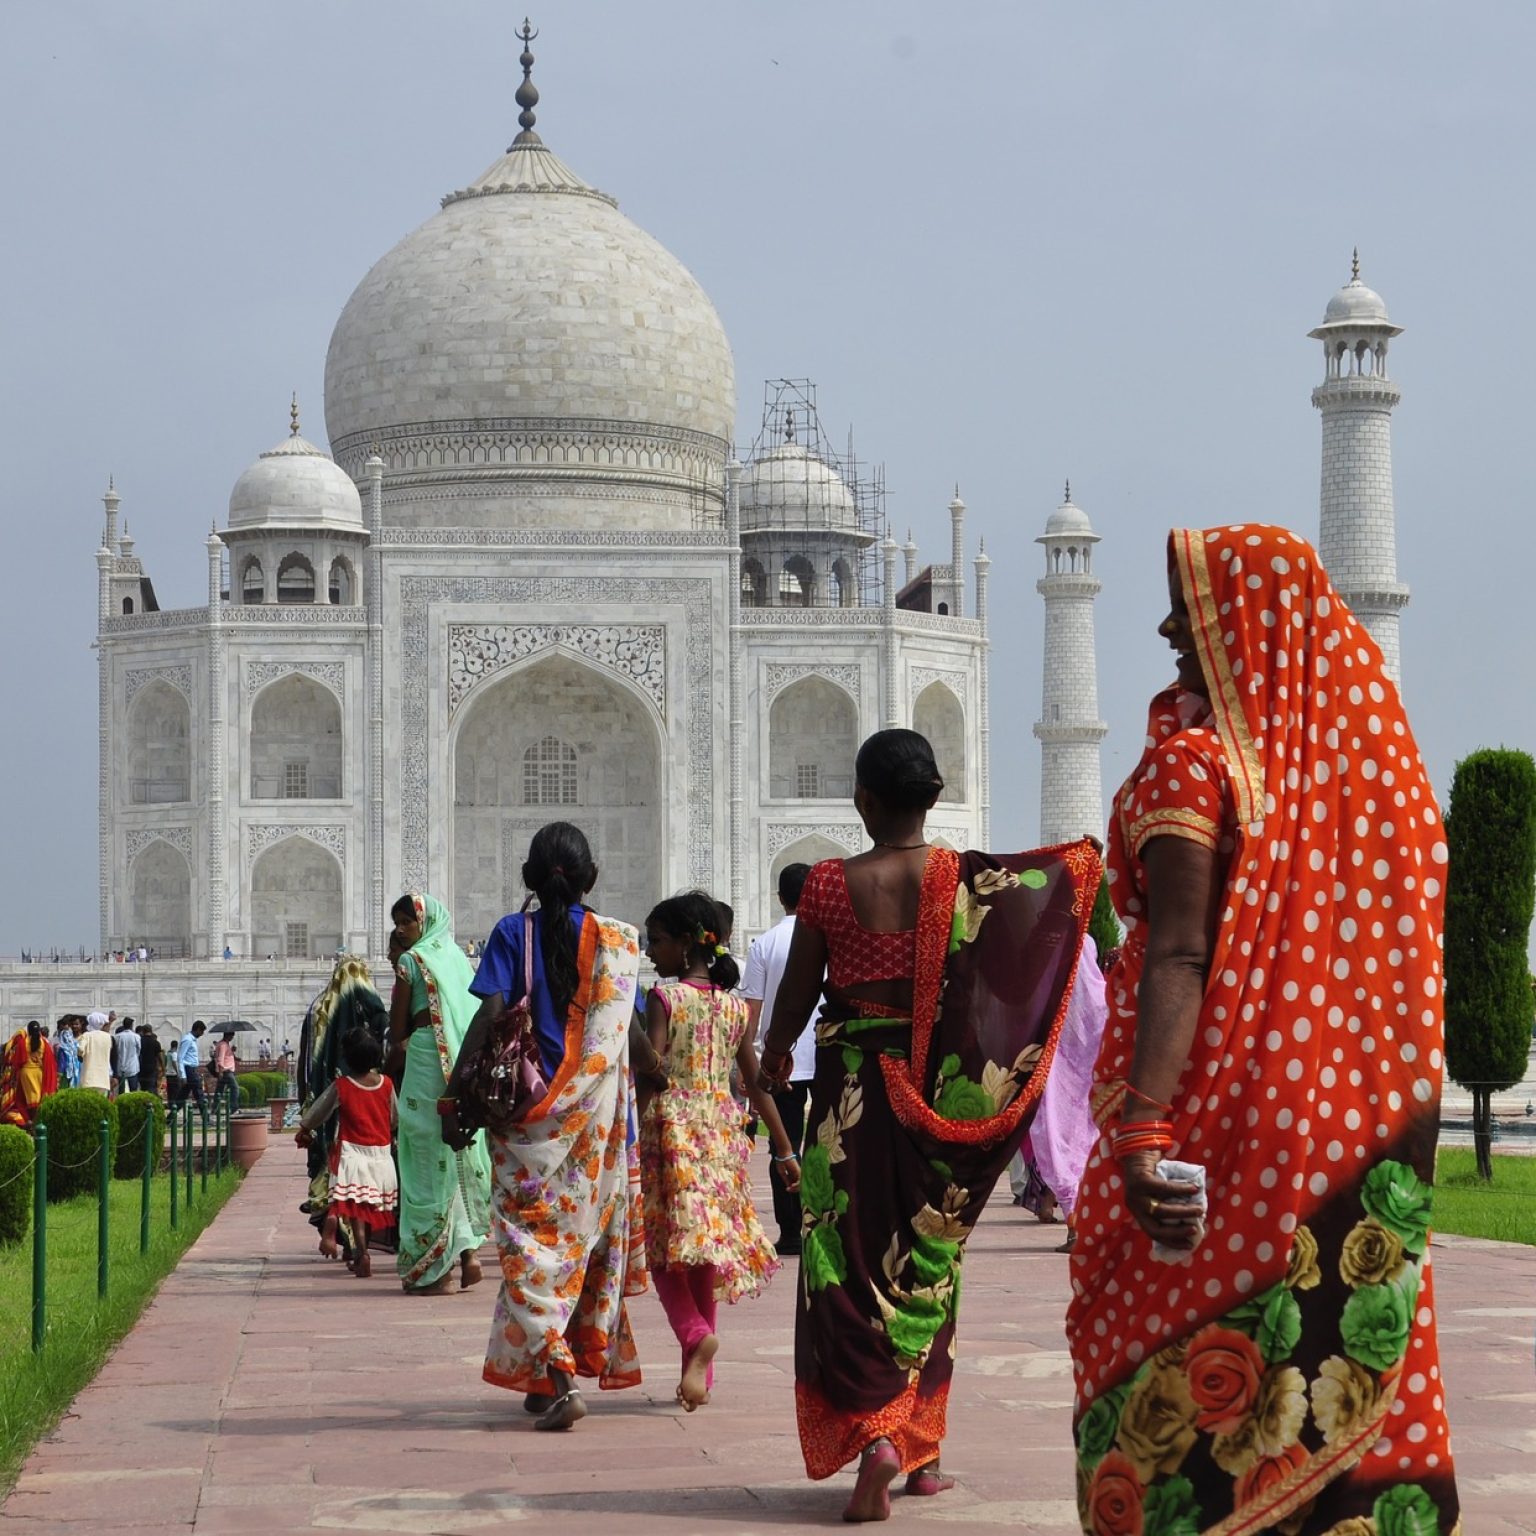 taj mahal gee8efae33 1920 CoP26: How India is Paving the Way Towards Climate Action